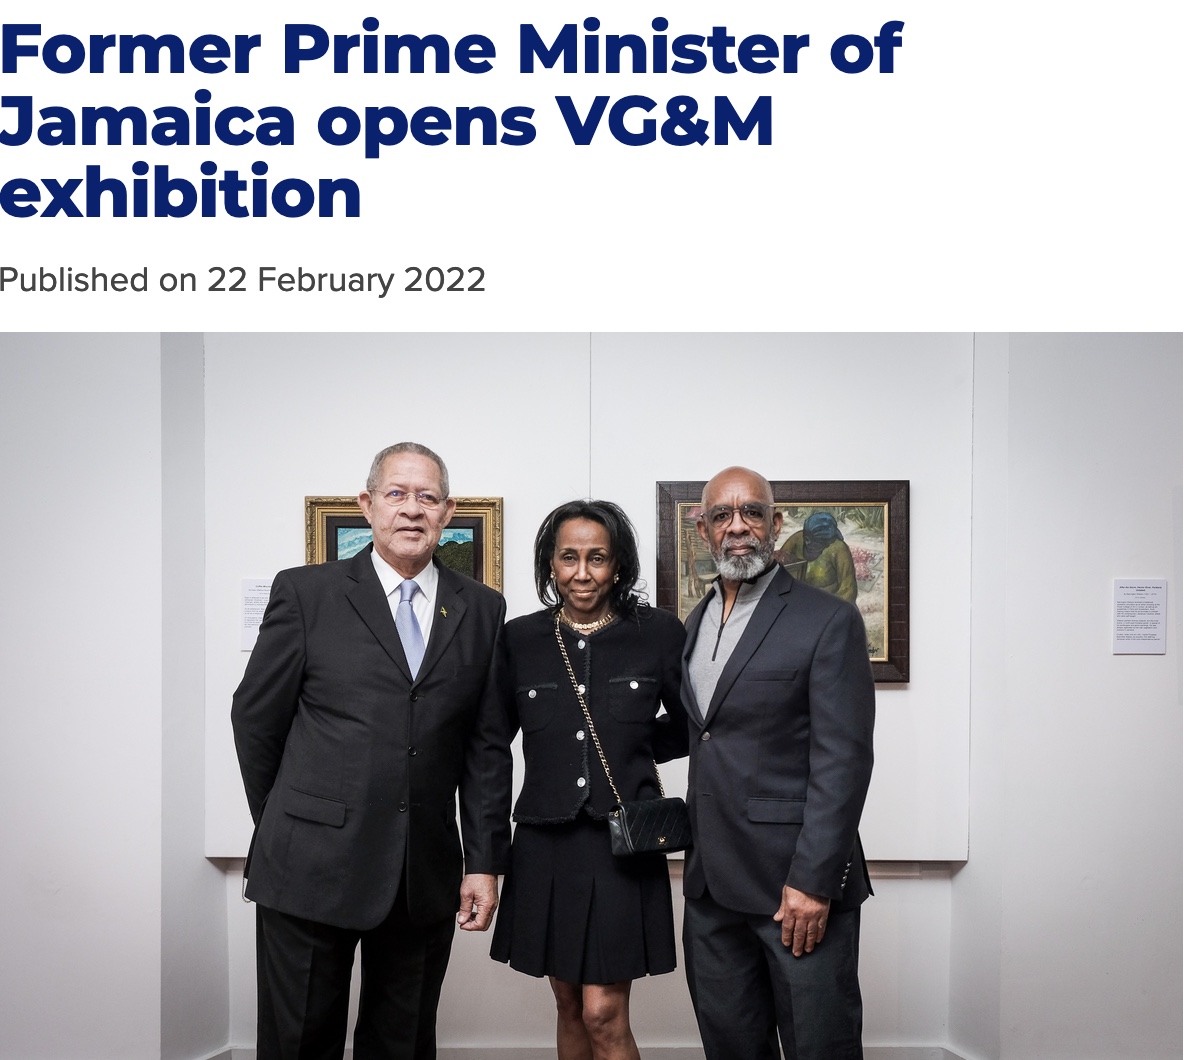 Prime Minister opens Victoria and Albert Museum exhibition with Jamaican art collection 2022